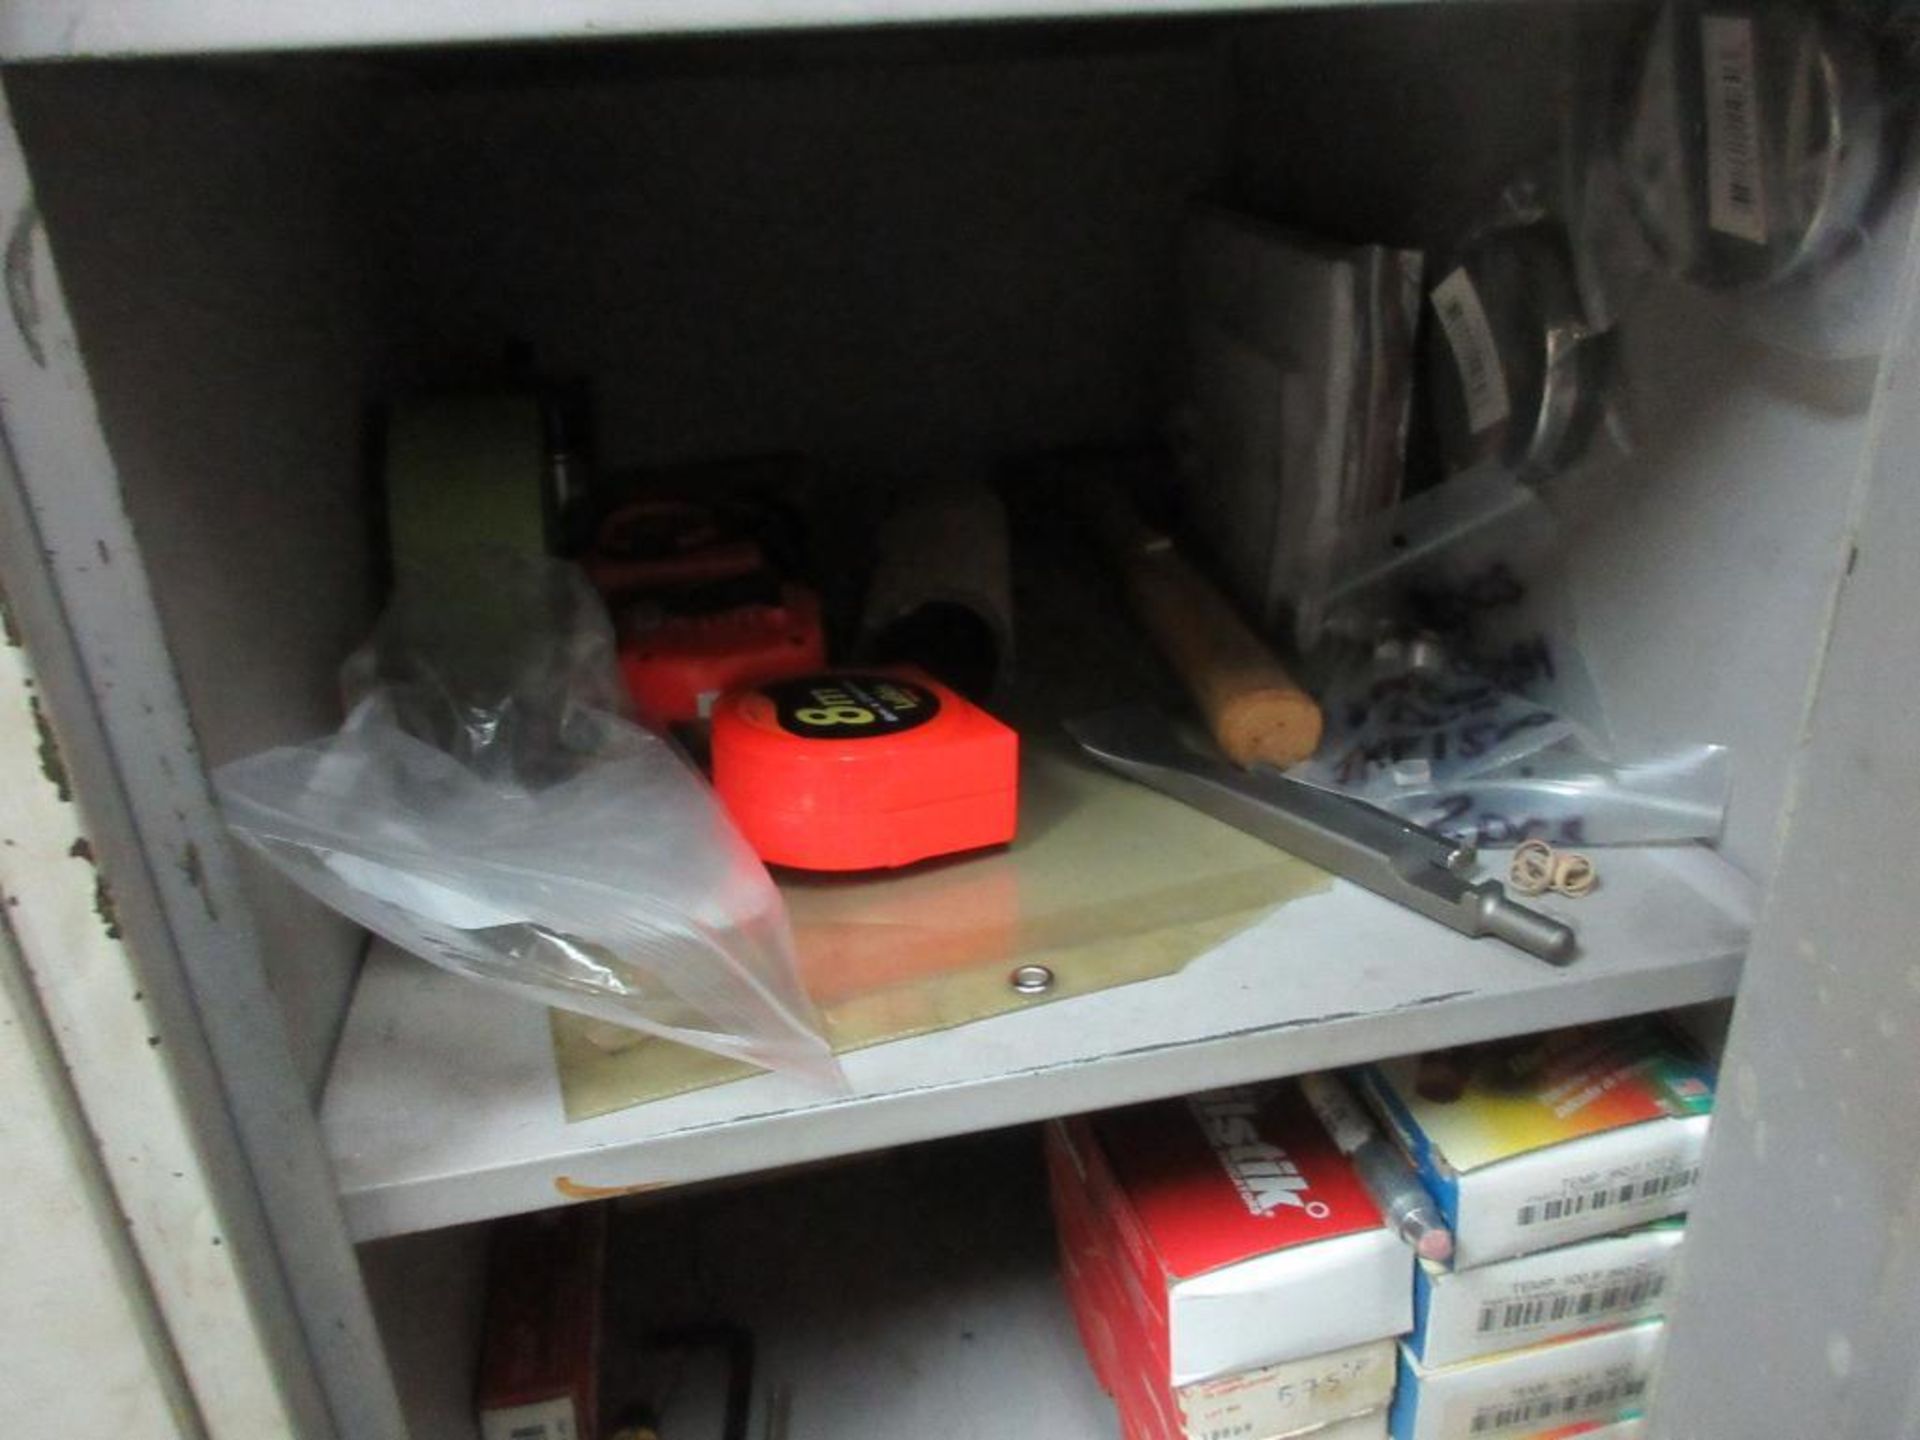 CONTENTS OF 3 CABINETS IN WORK AREA, TEST AND MEASUREMENT EQUIPMENT, METERS, TOOLS, ETC (OFFICES) - Image 8 of 18